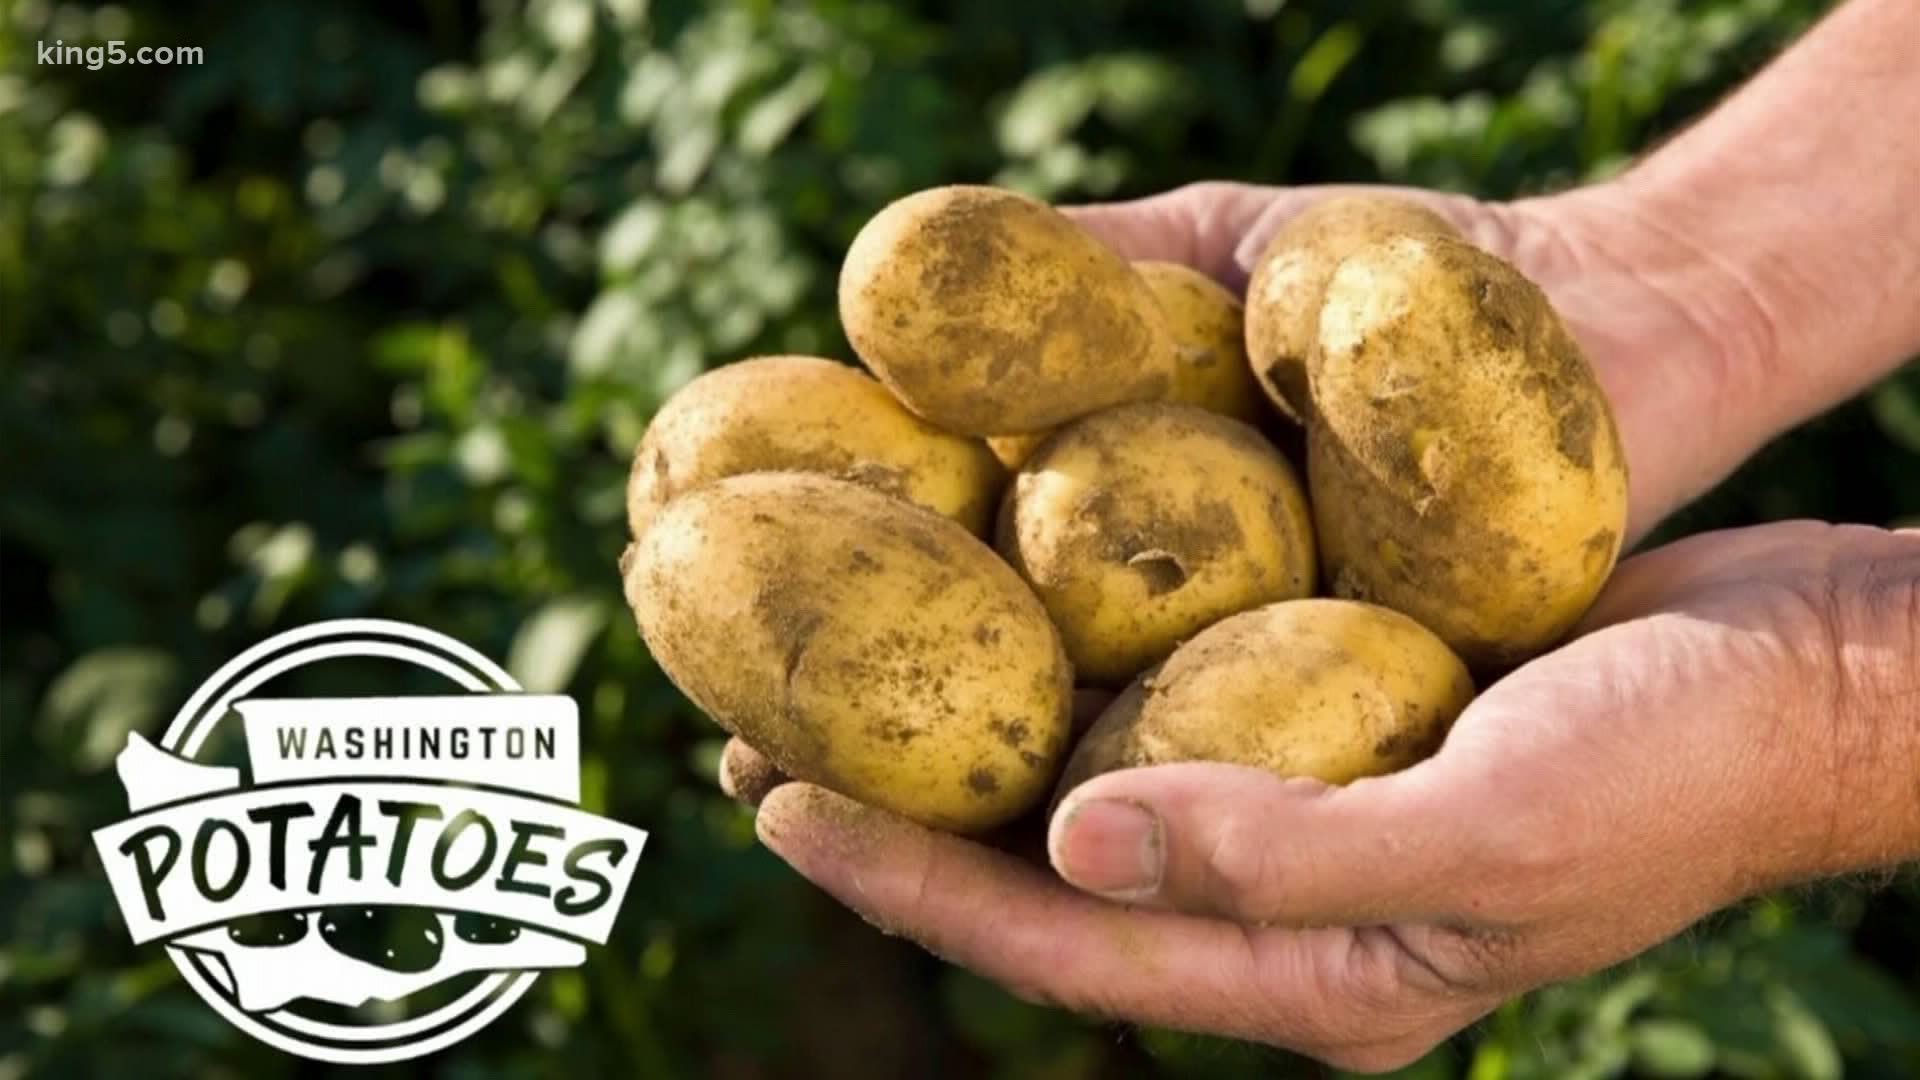 Farmers across the state are coming together to donate 1 million pounds of potatoes so the crop doesn't go to waste and others can benefit.